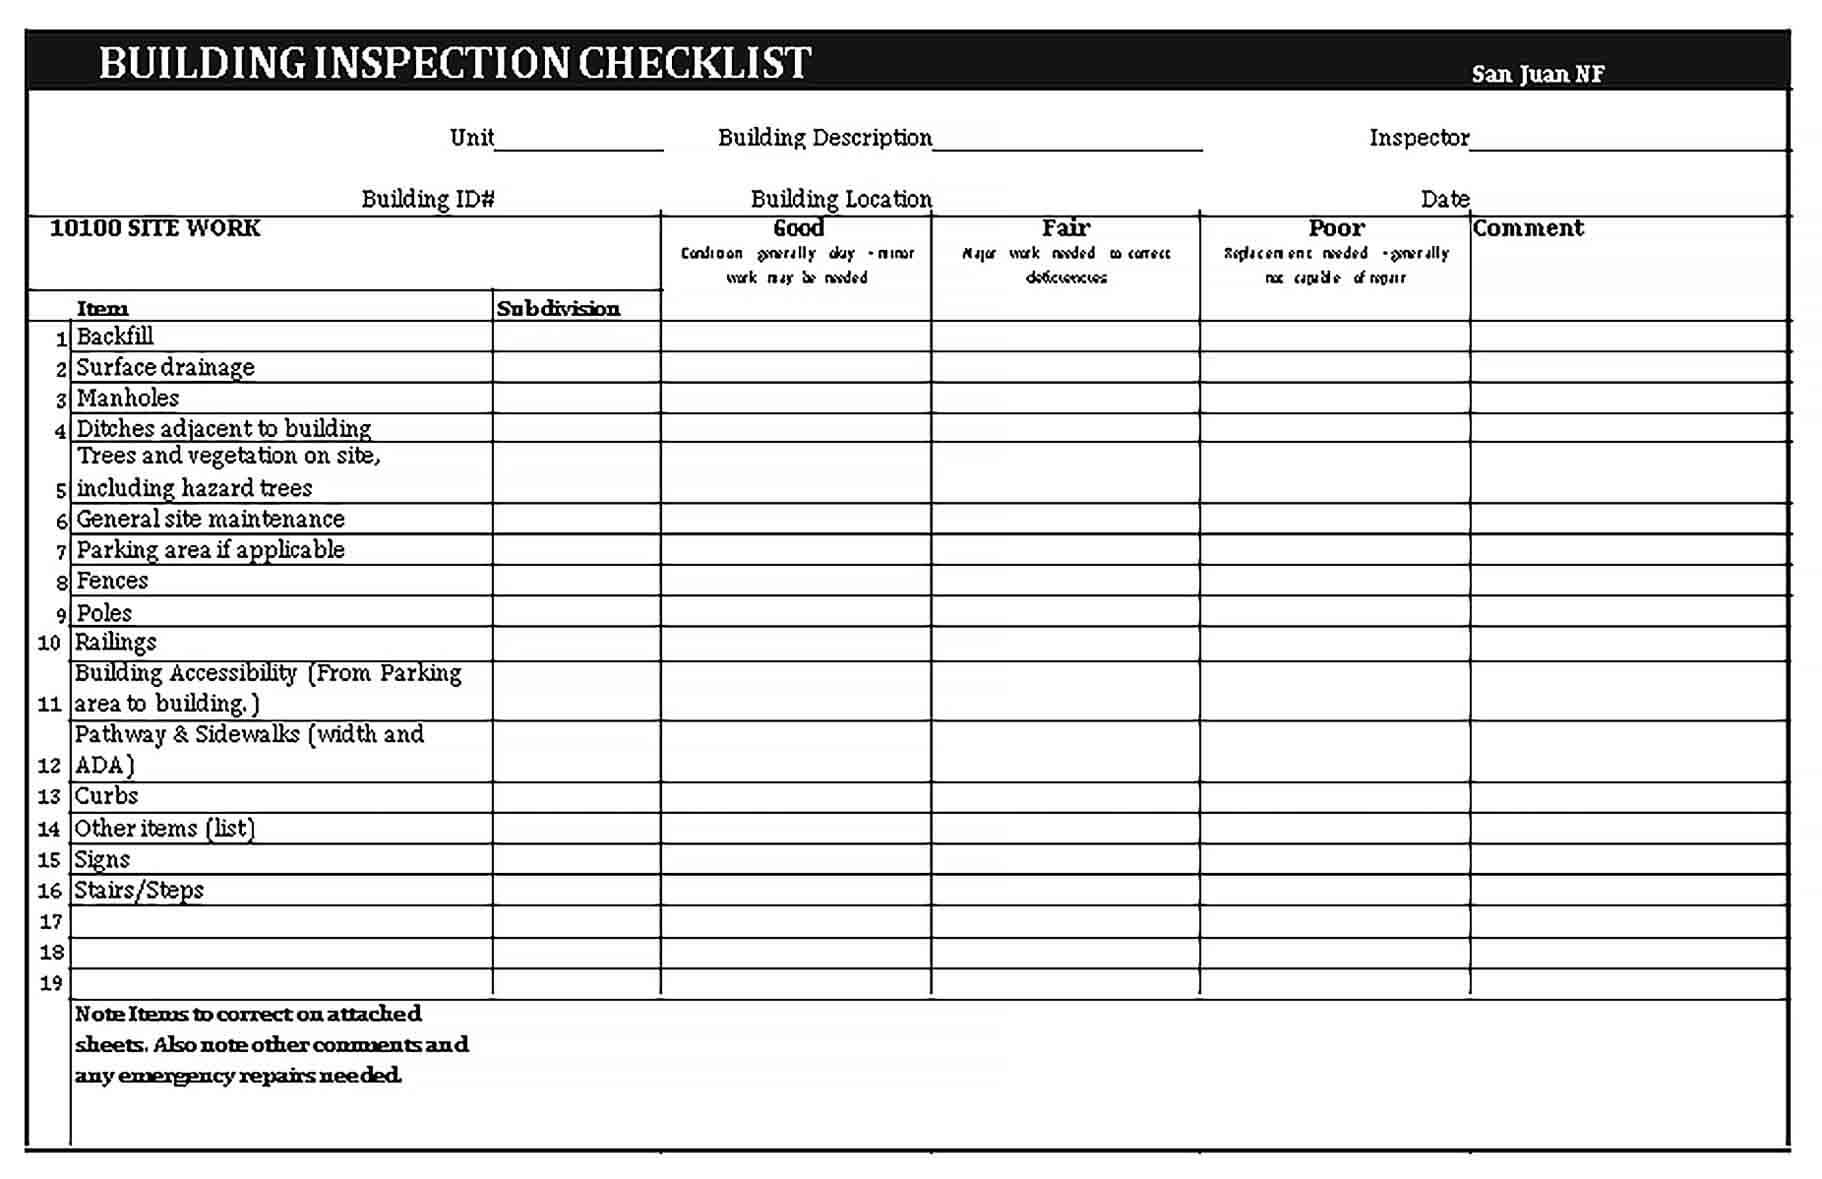 Sample Building Inspection Checklist Template 1